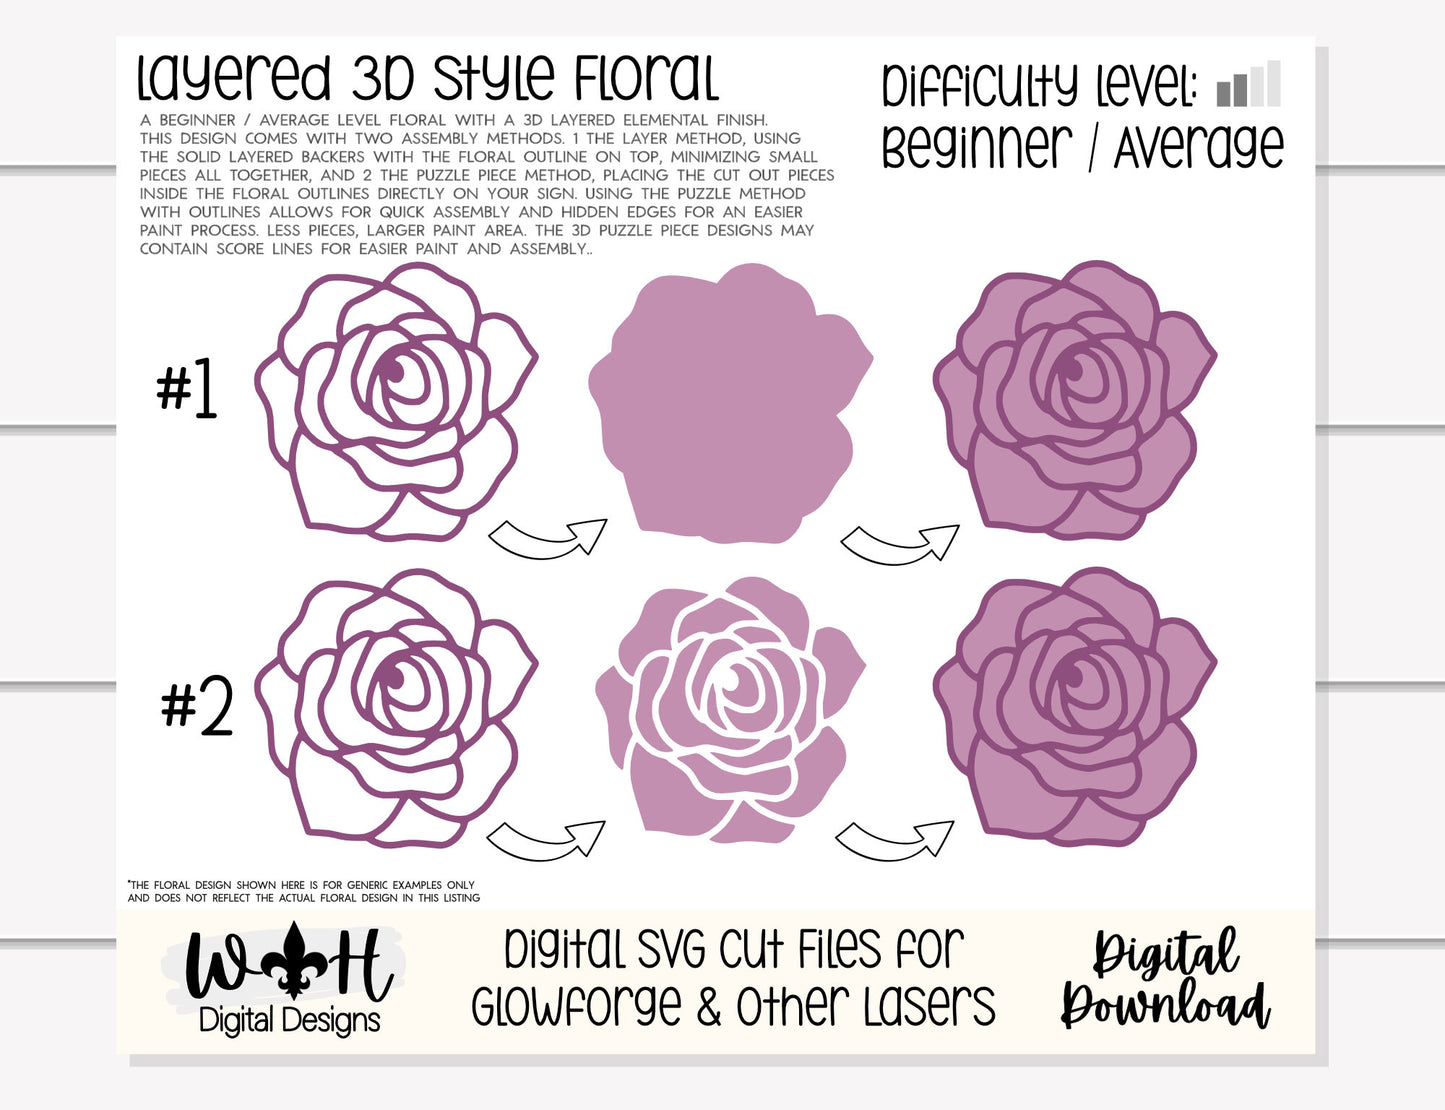 Beauty Rose and Thorns Valentine Door Hanger Round - Floral Sign Making and DIY Kits - Cut File For Glowforge Laser - Digital SVG File